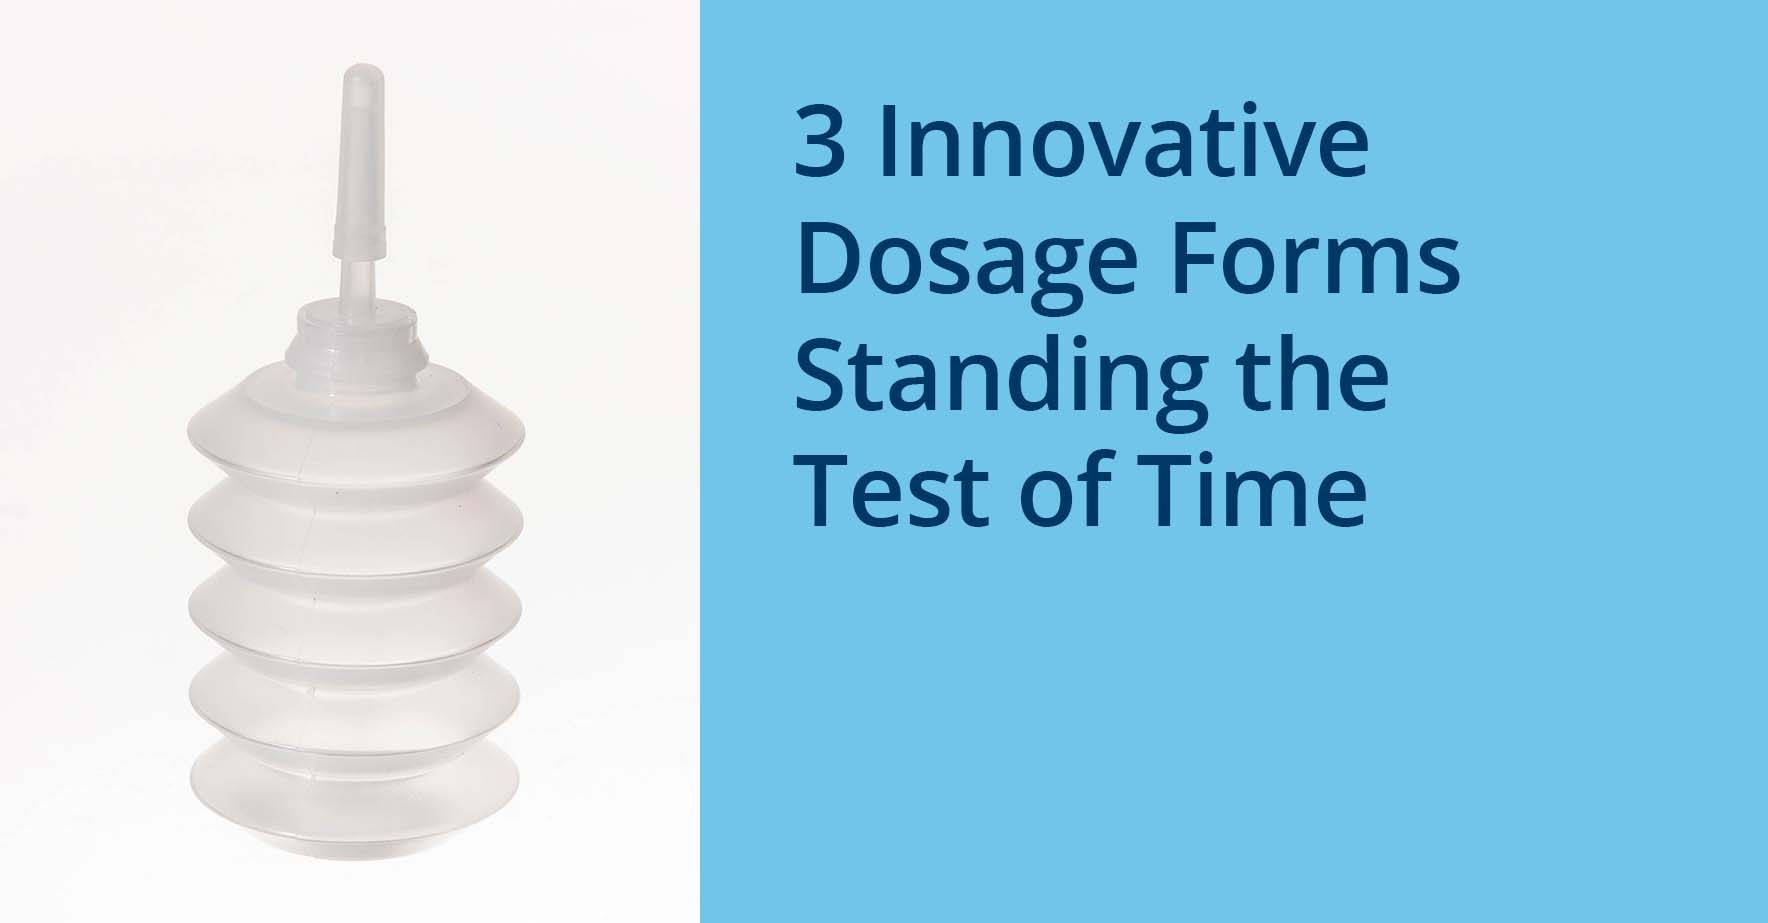 3 _innovative_dosage_forms_standing_the_test_of_time.jpg